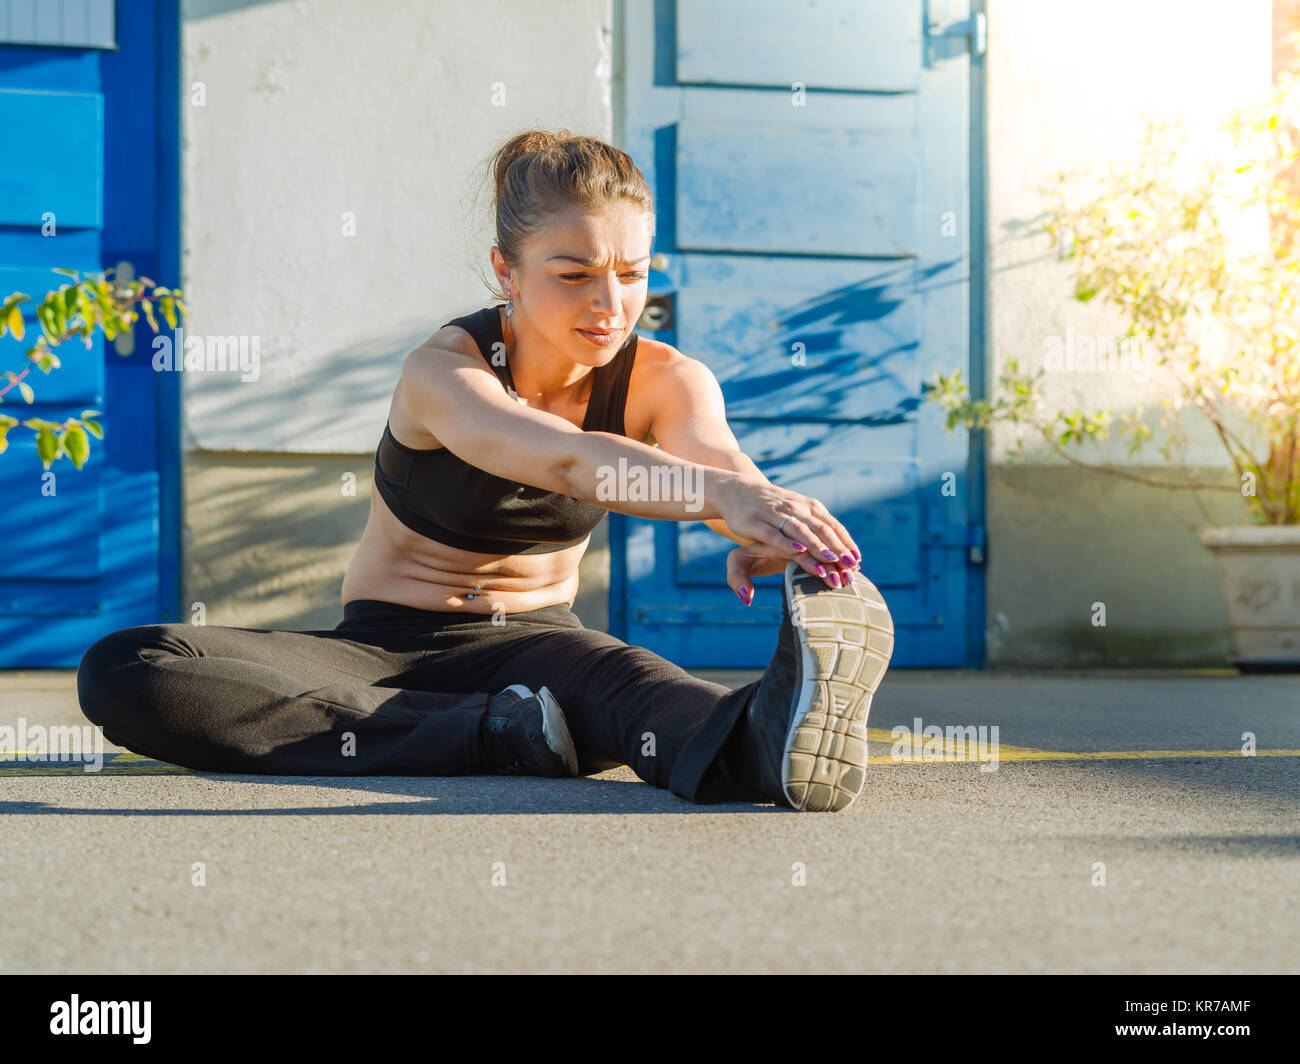 Young woman stretching her legs outdoors Stock Photo